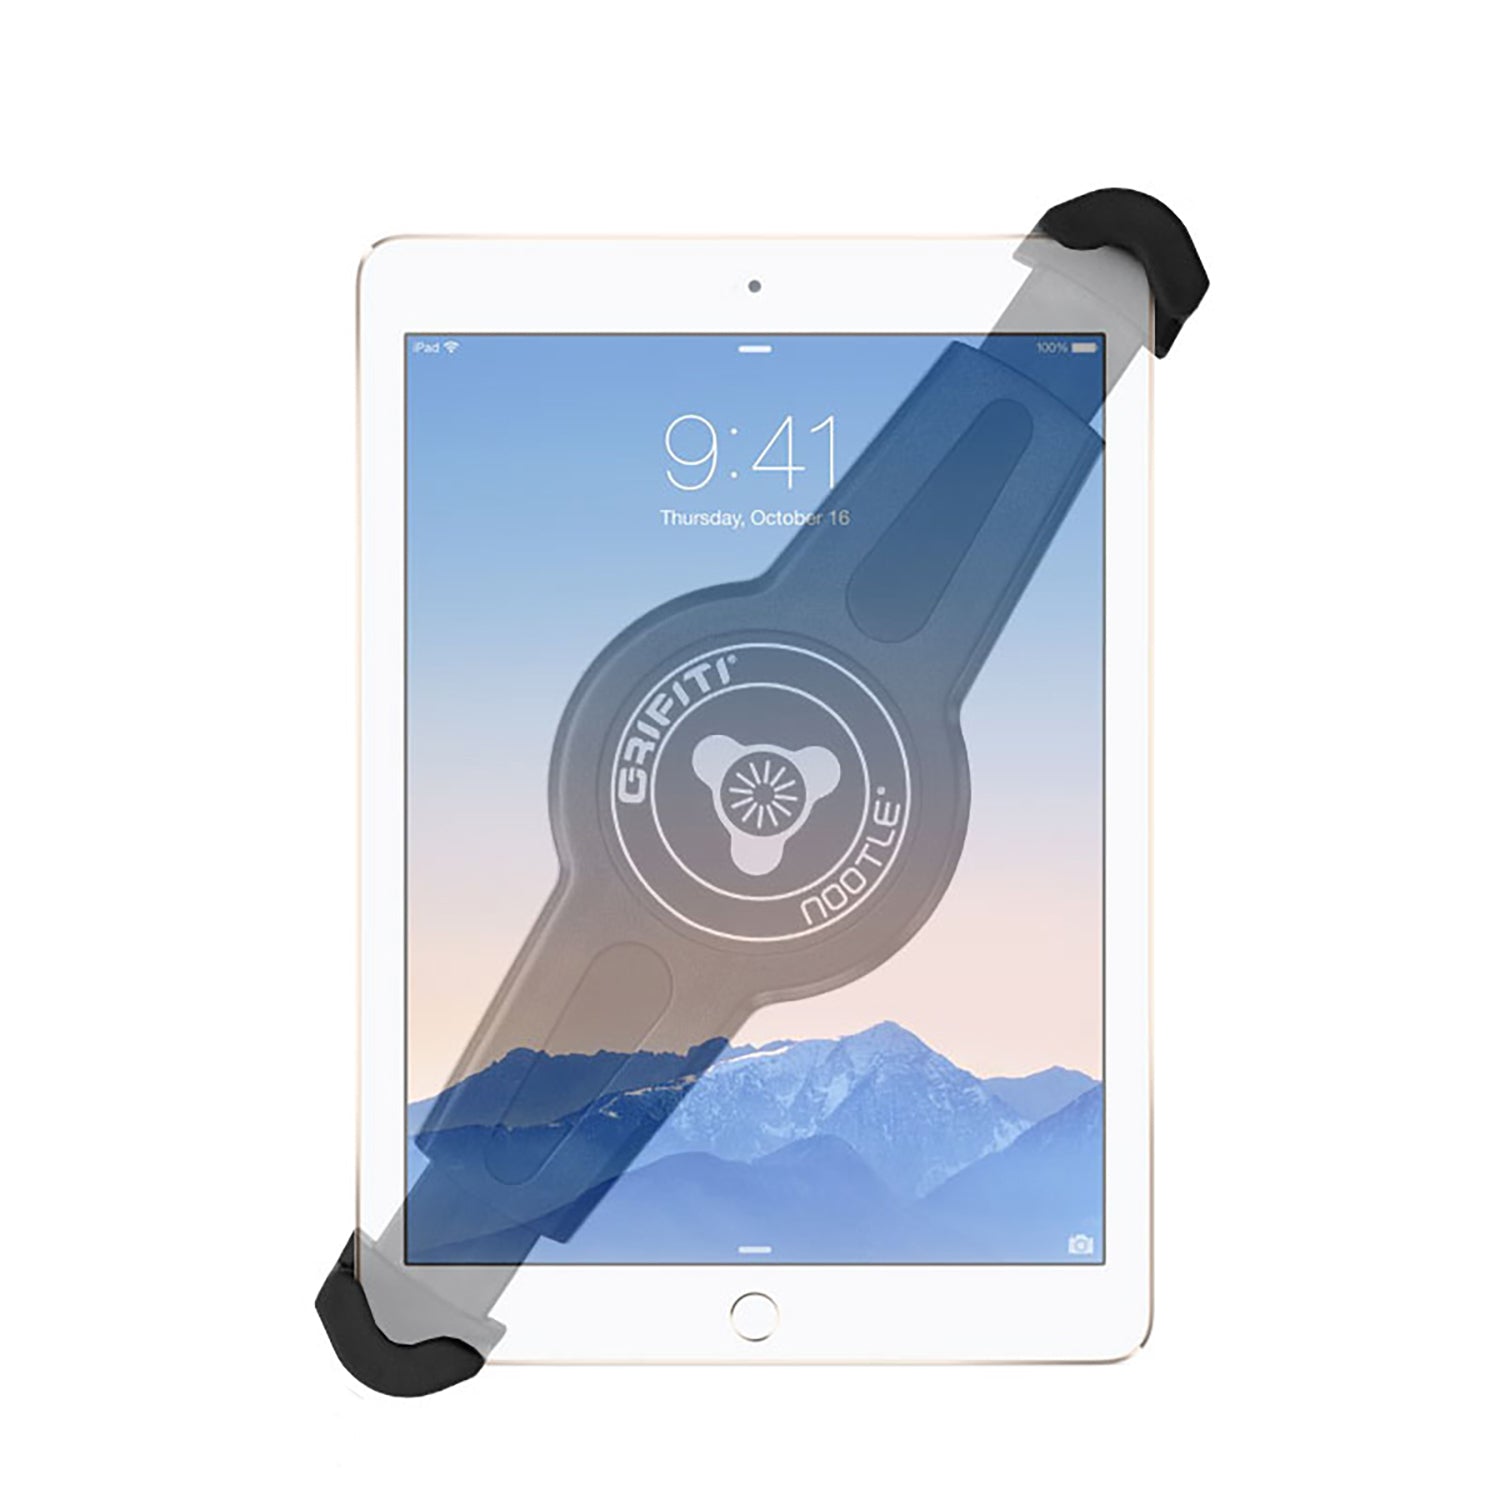 Grifiti Nootle Universal Tablet Mount Small to Standard iPads and Tablets